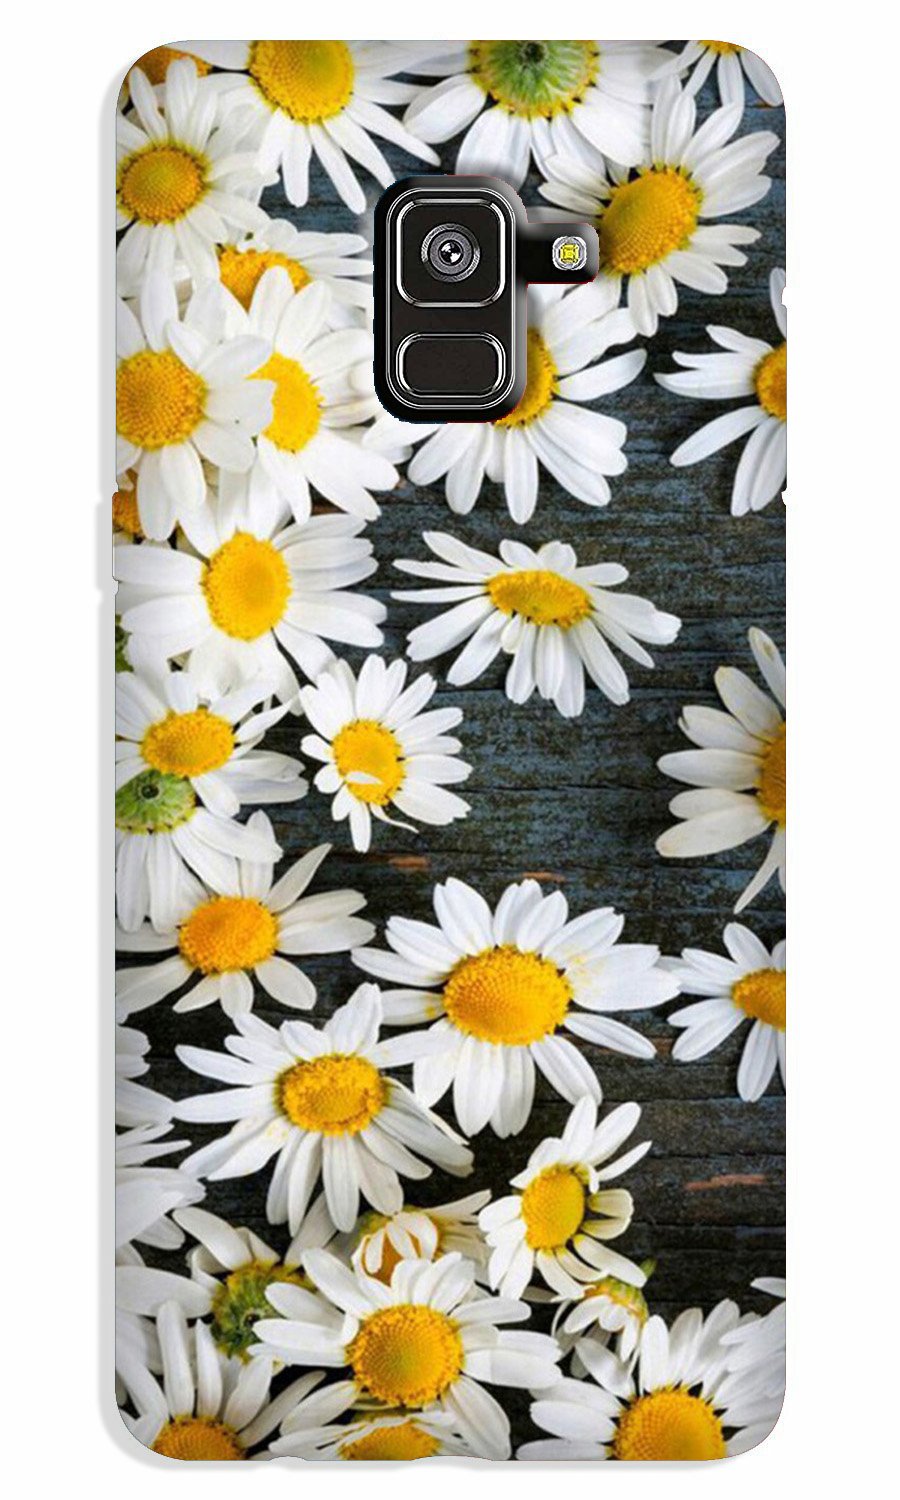 White flowers2 Case for Galaxy J6 / On6